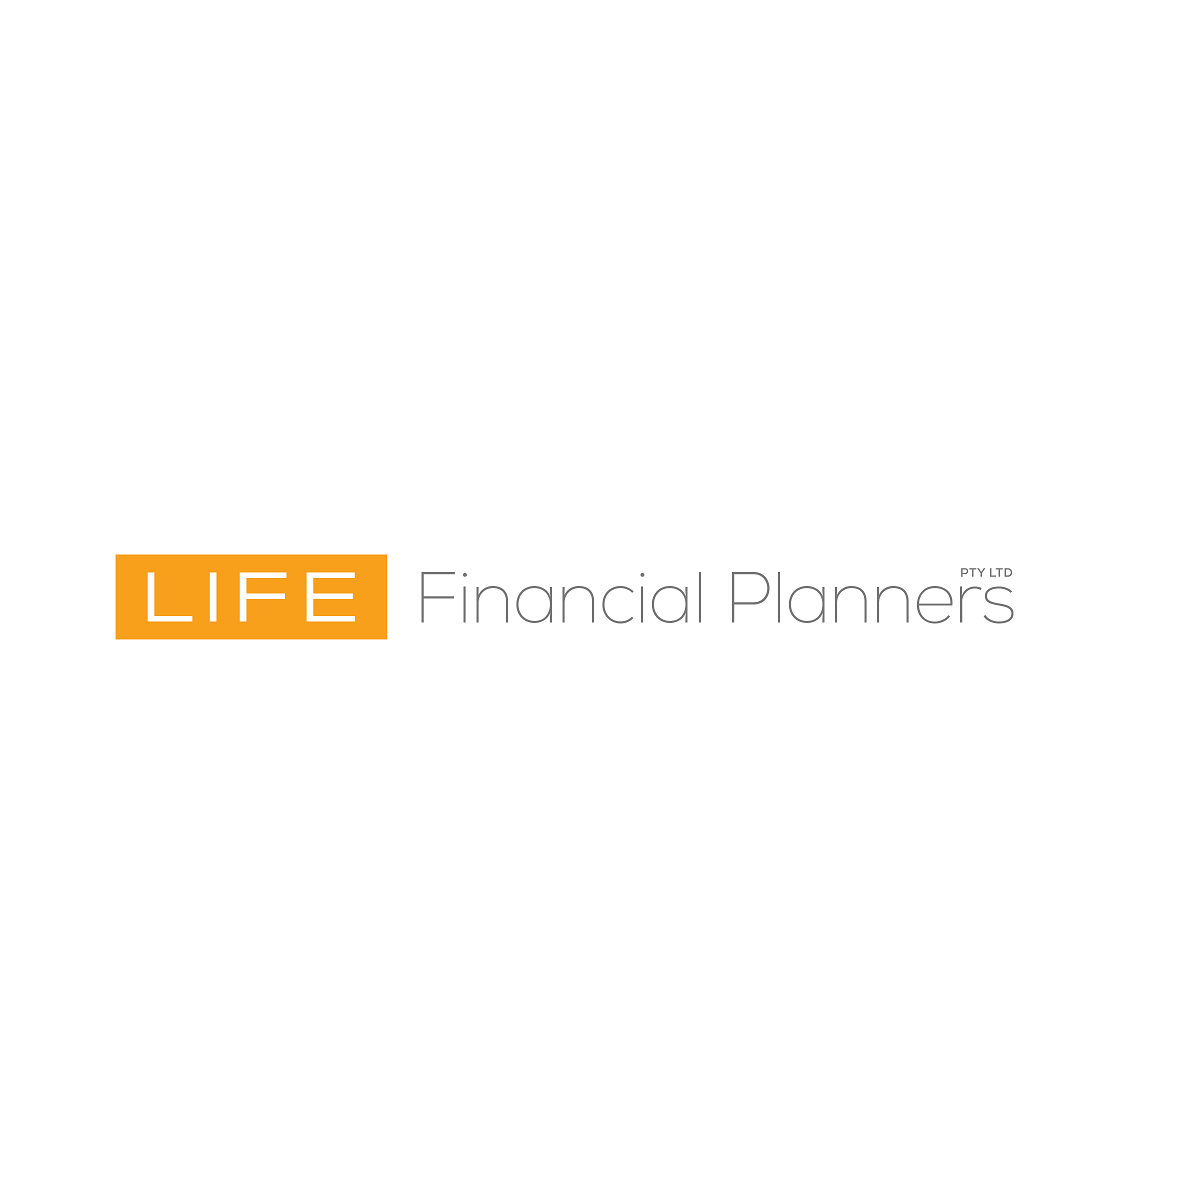 LIFE Financial Planners